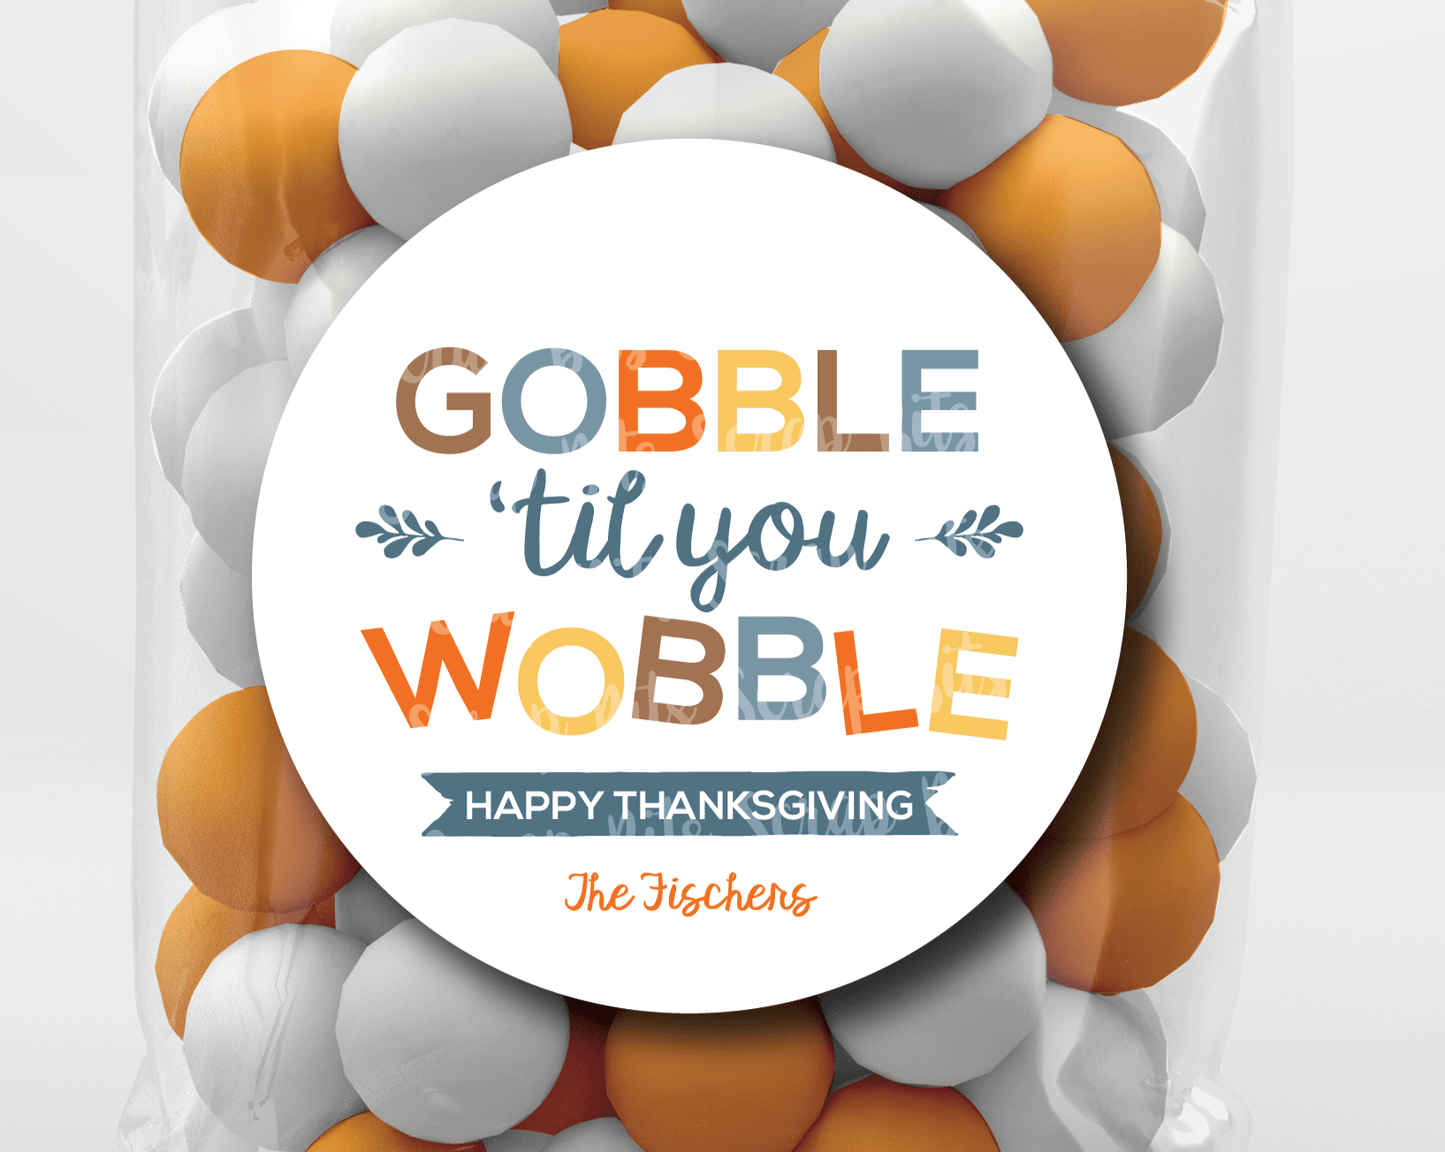 Gobble Til You Wobble Stickers . Thanksgiving Stickers or Tags - Scrap Bits